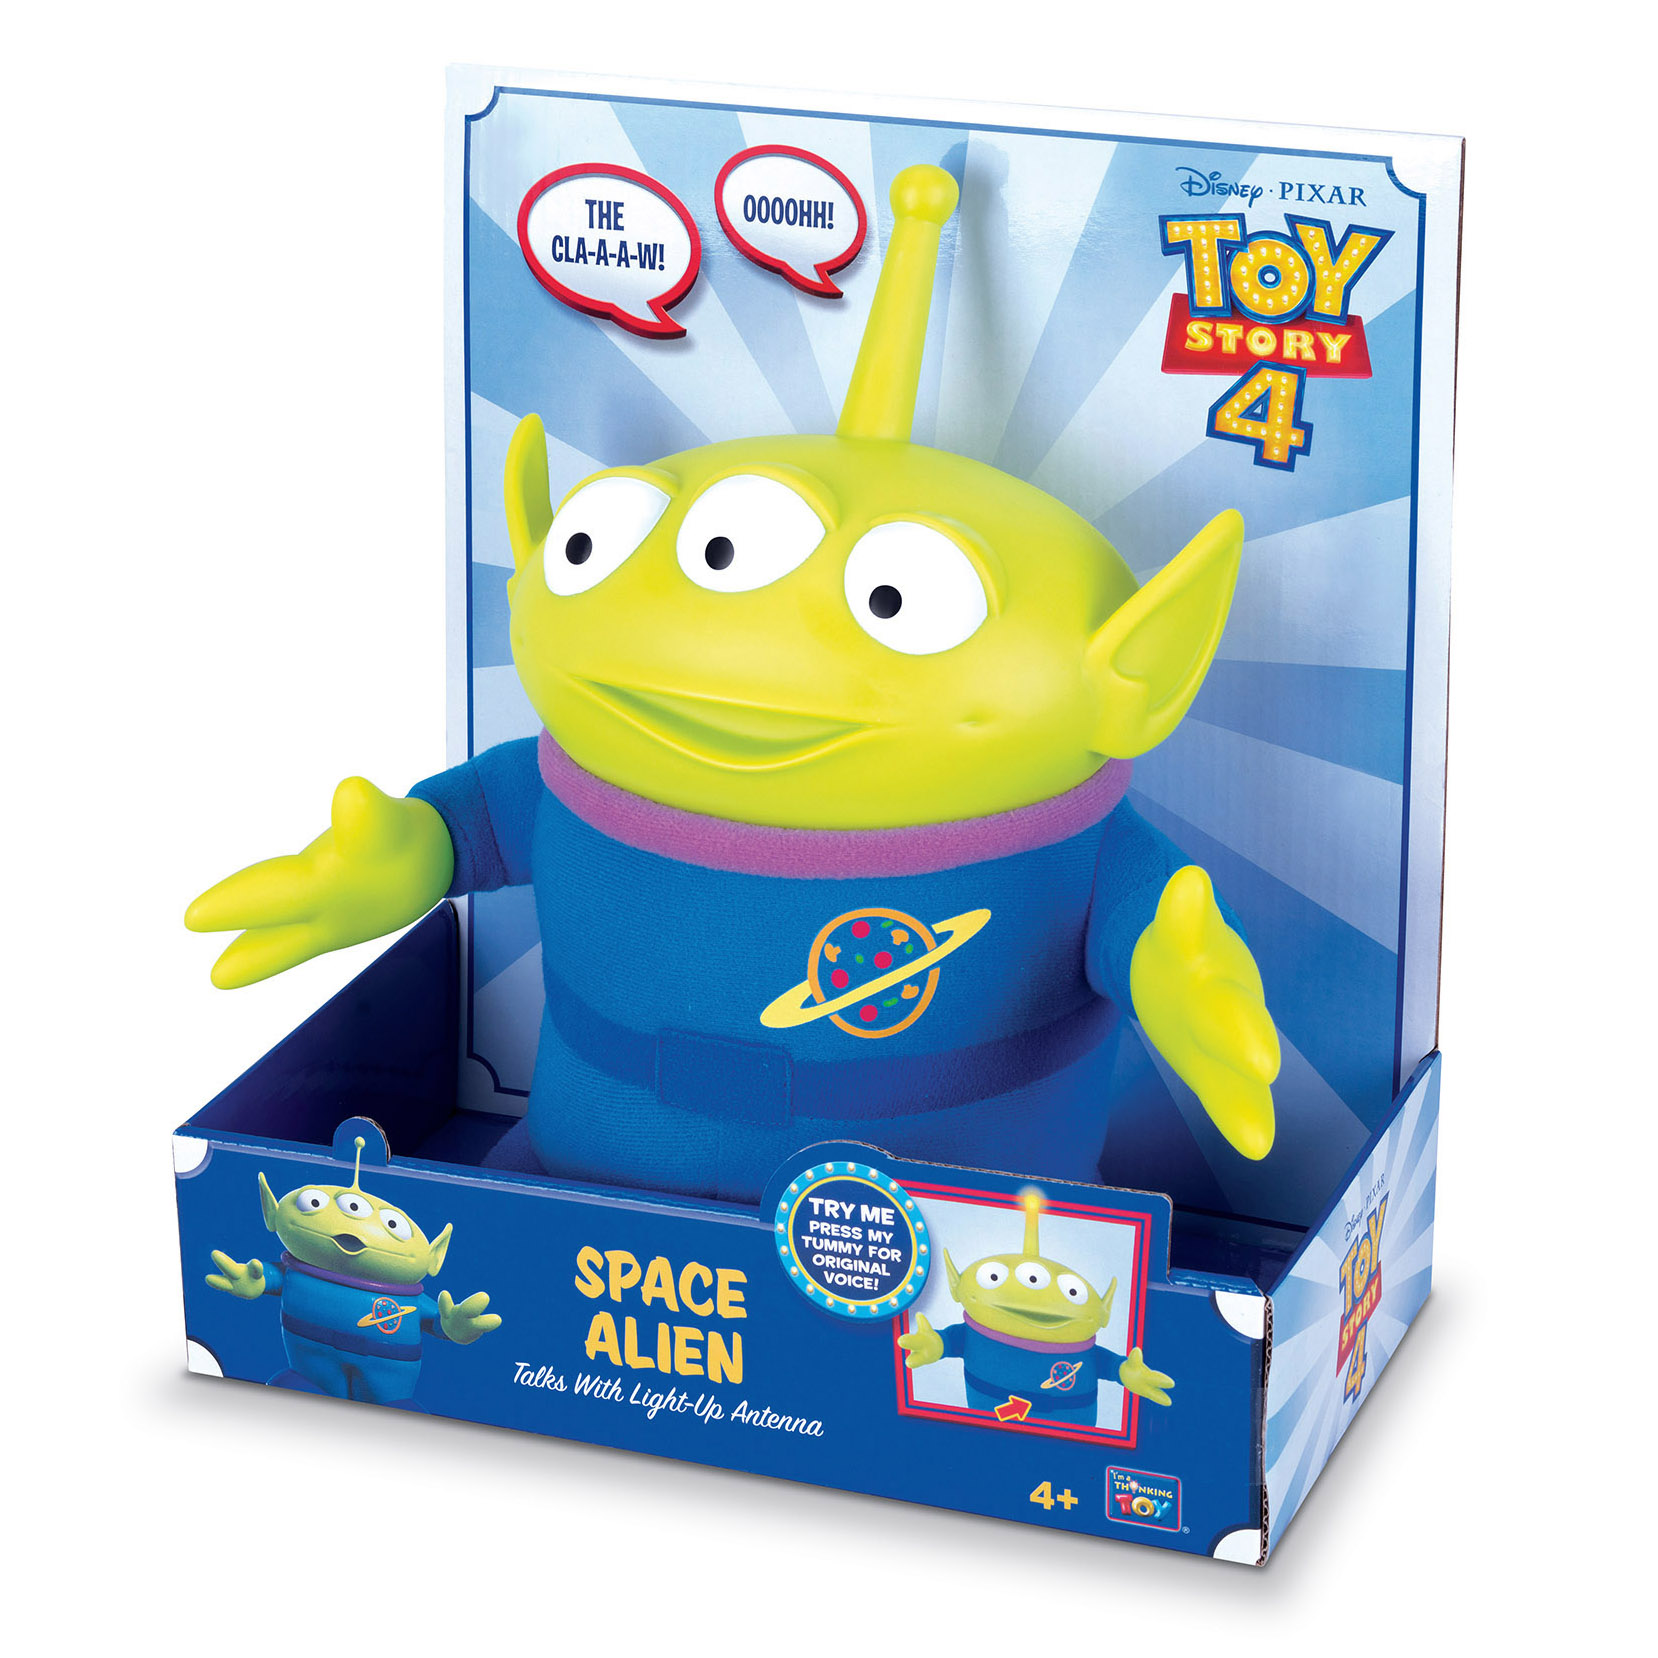 Disney Pixar Toy Story SPACE ALIEN Talks with Light-Up Antenna - image 5 of 5